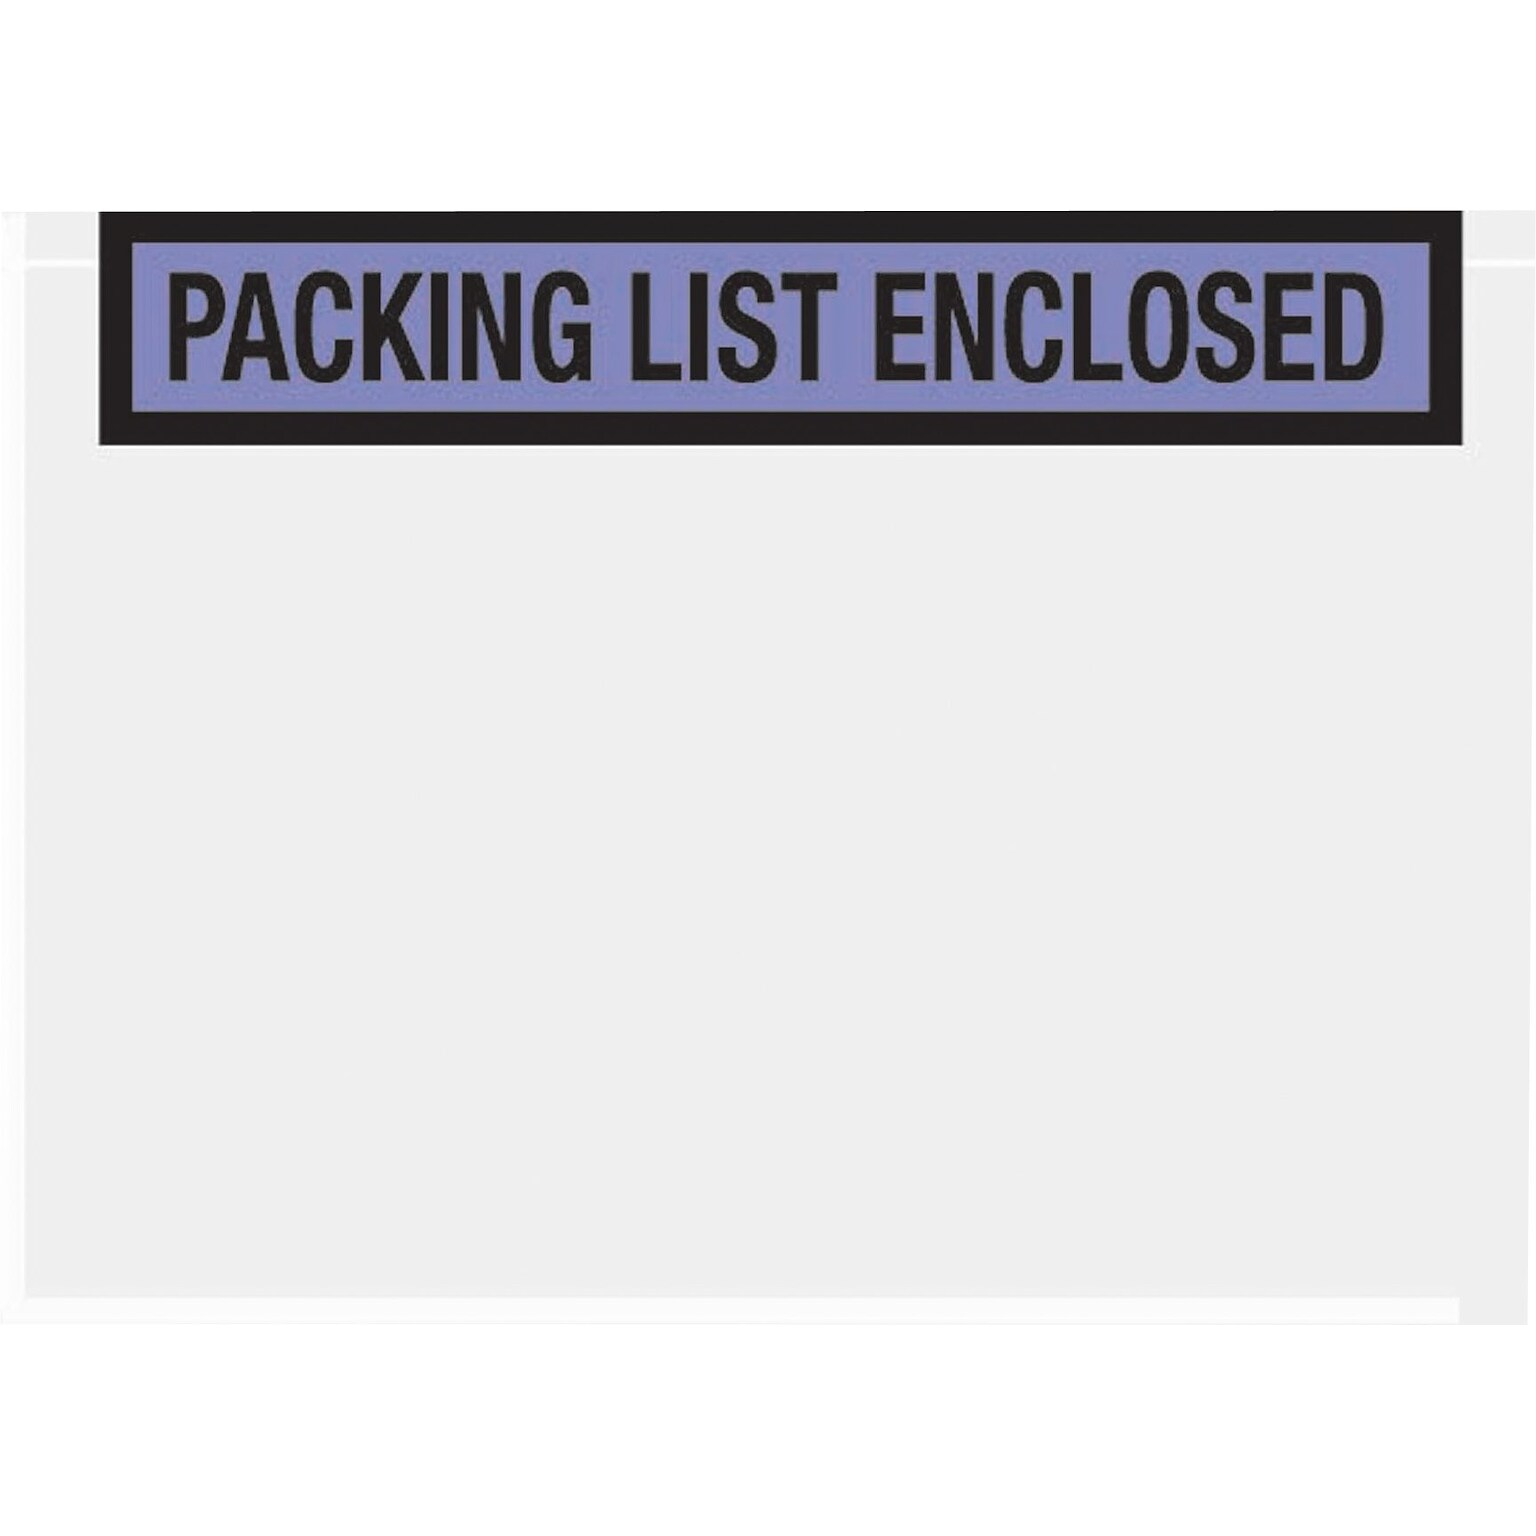 SI Products Packing List Envelopes, 7 x 5.5, Blue Panel Face, Packing List Enclosed, 1000/Case (PL458)